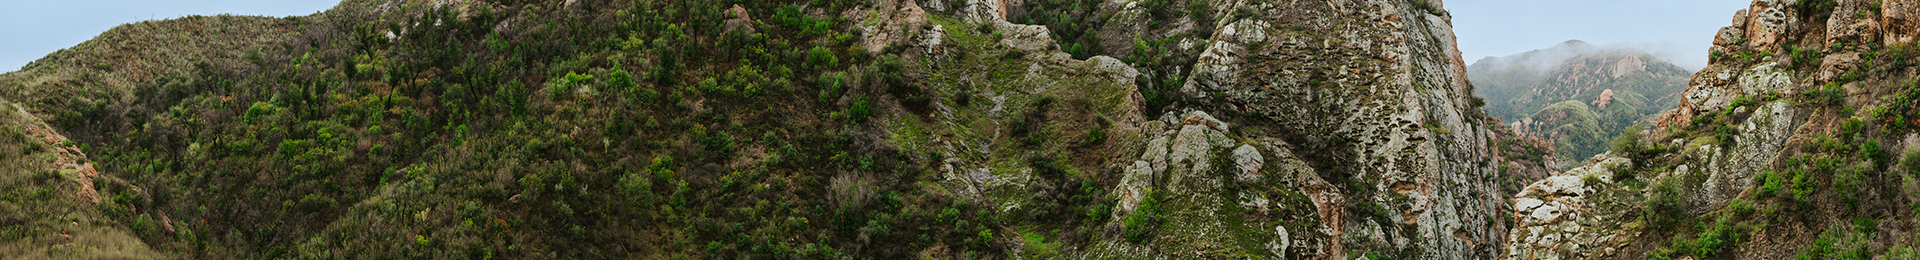 A rocky hillside with bushes and trees.